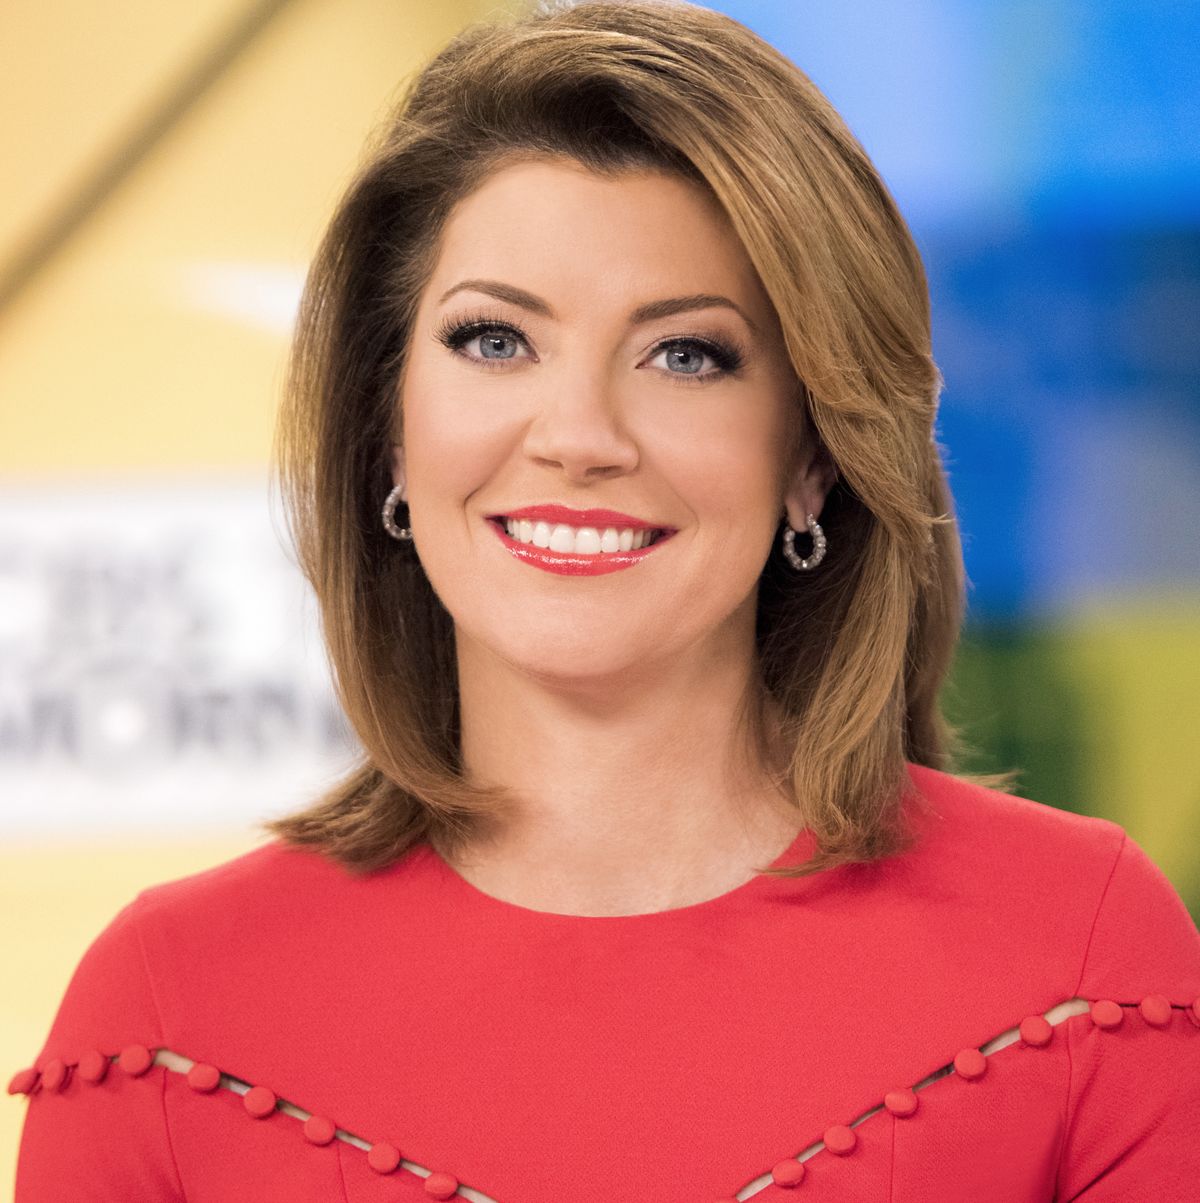 What Happened to Norah O'Donnell on 'CBS This Morning'? - Where Is Norah on 'CBS This Morning'?